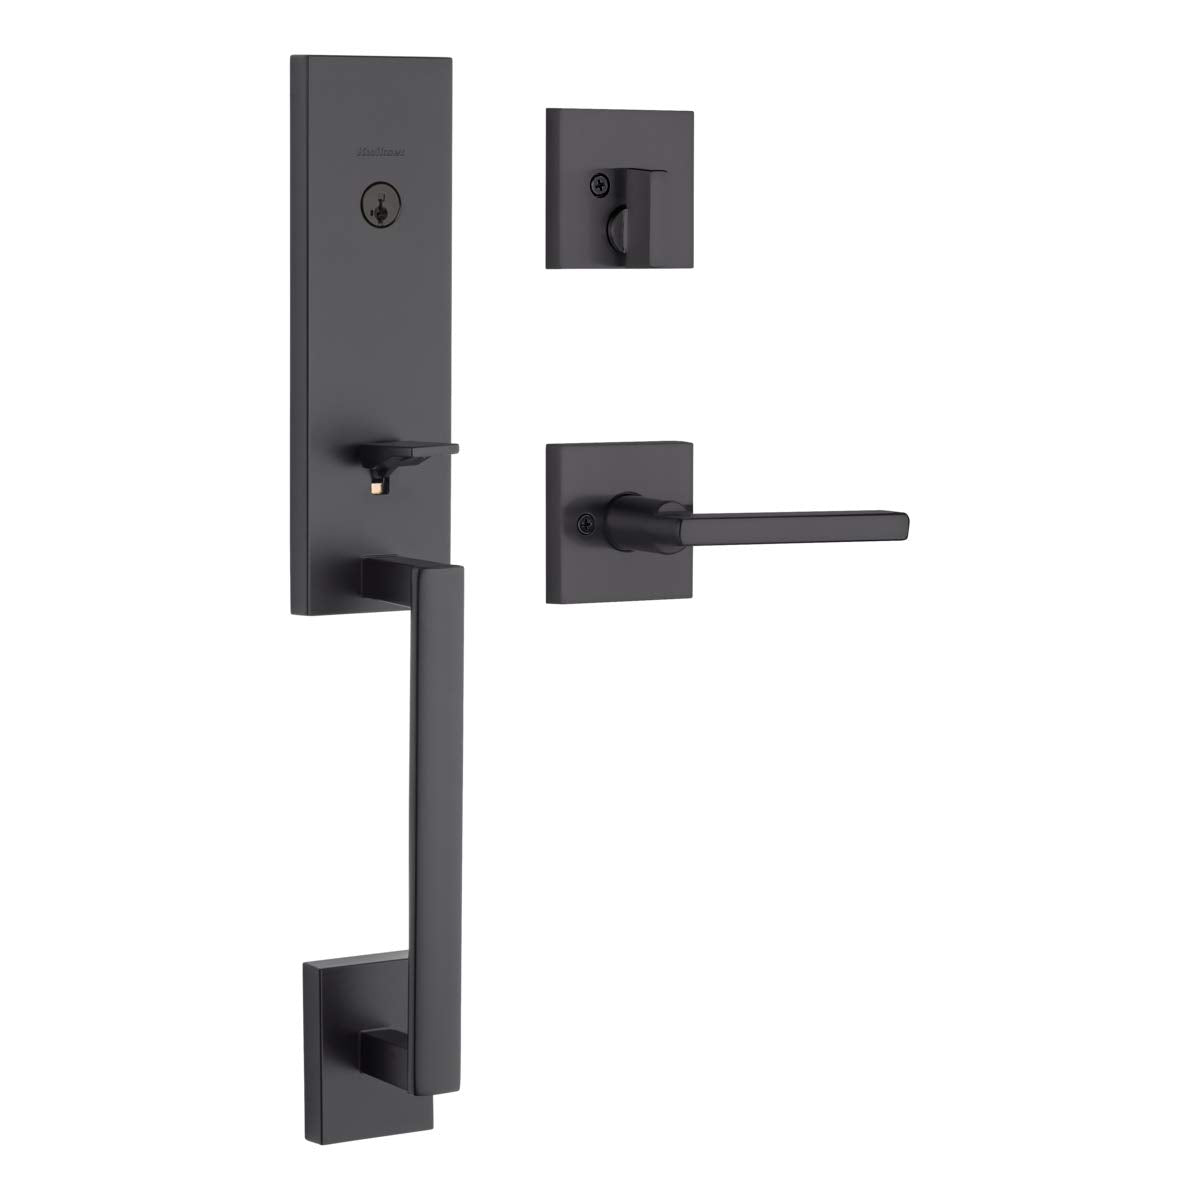 Kwikset Vancouver Low Profile Front Lock Handleset with Microban Including Slim Modern Halifax Door Lever Handle Featuring SmartKey Security, Iron Black 98180-015 - Like New